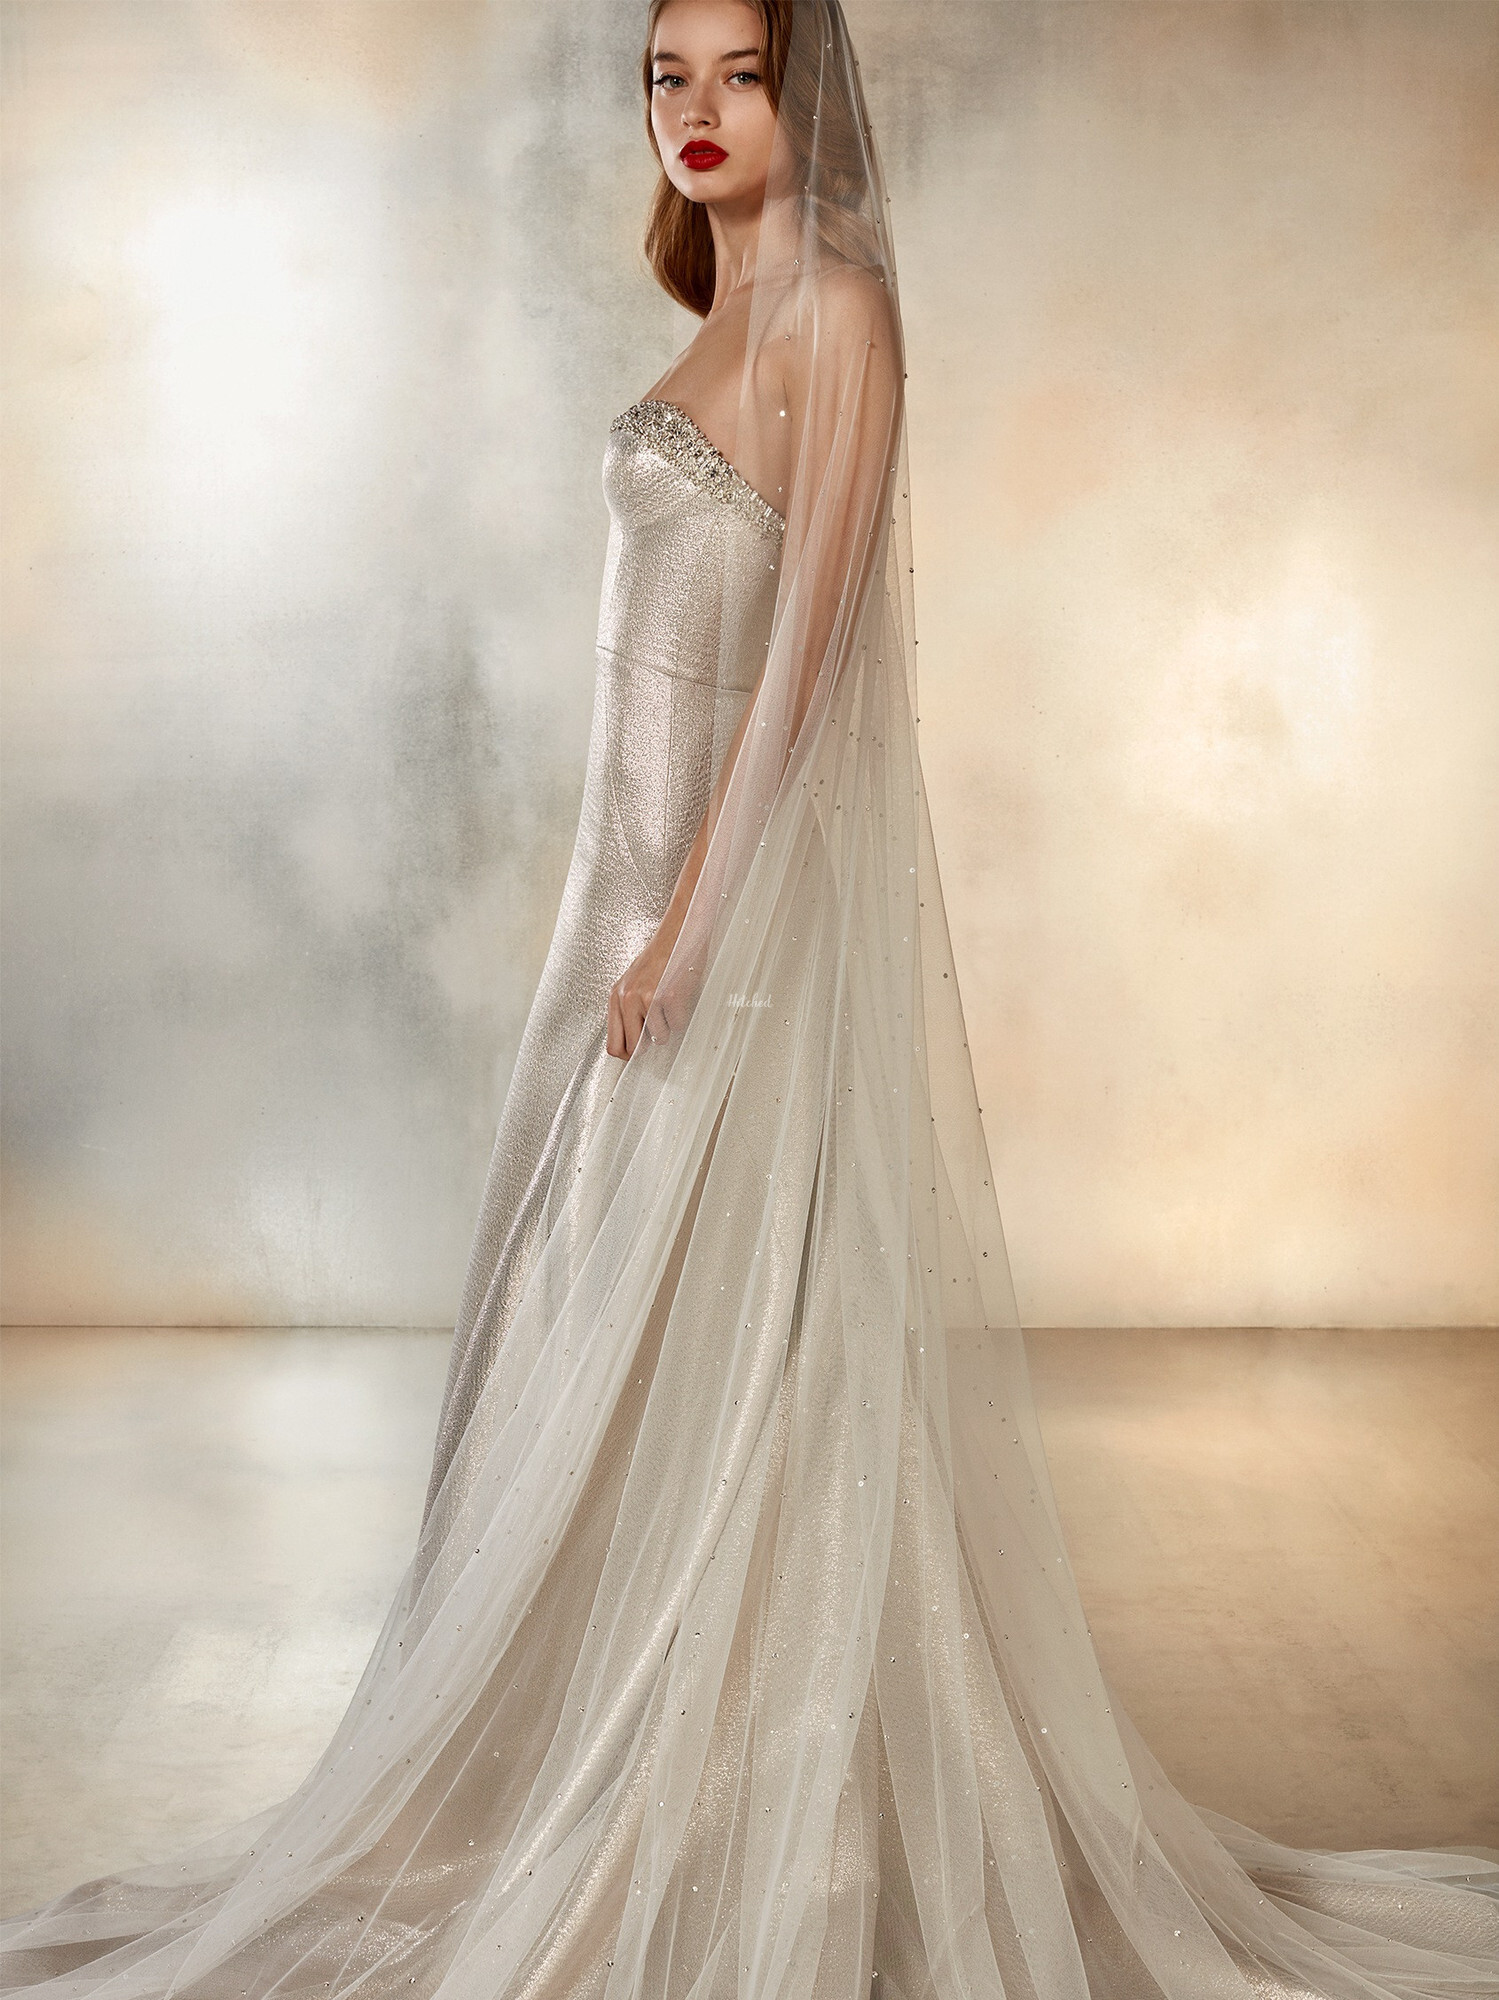 RISING Wedding Dress from Atelier Pronovias - hitched.co.uk